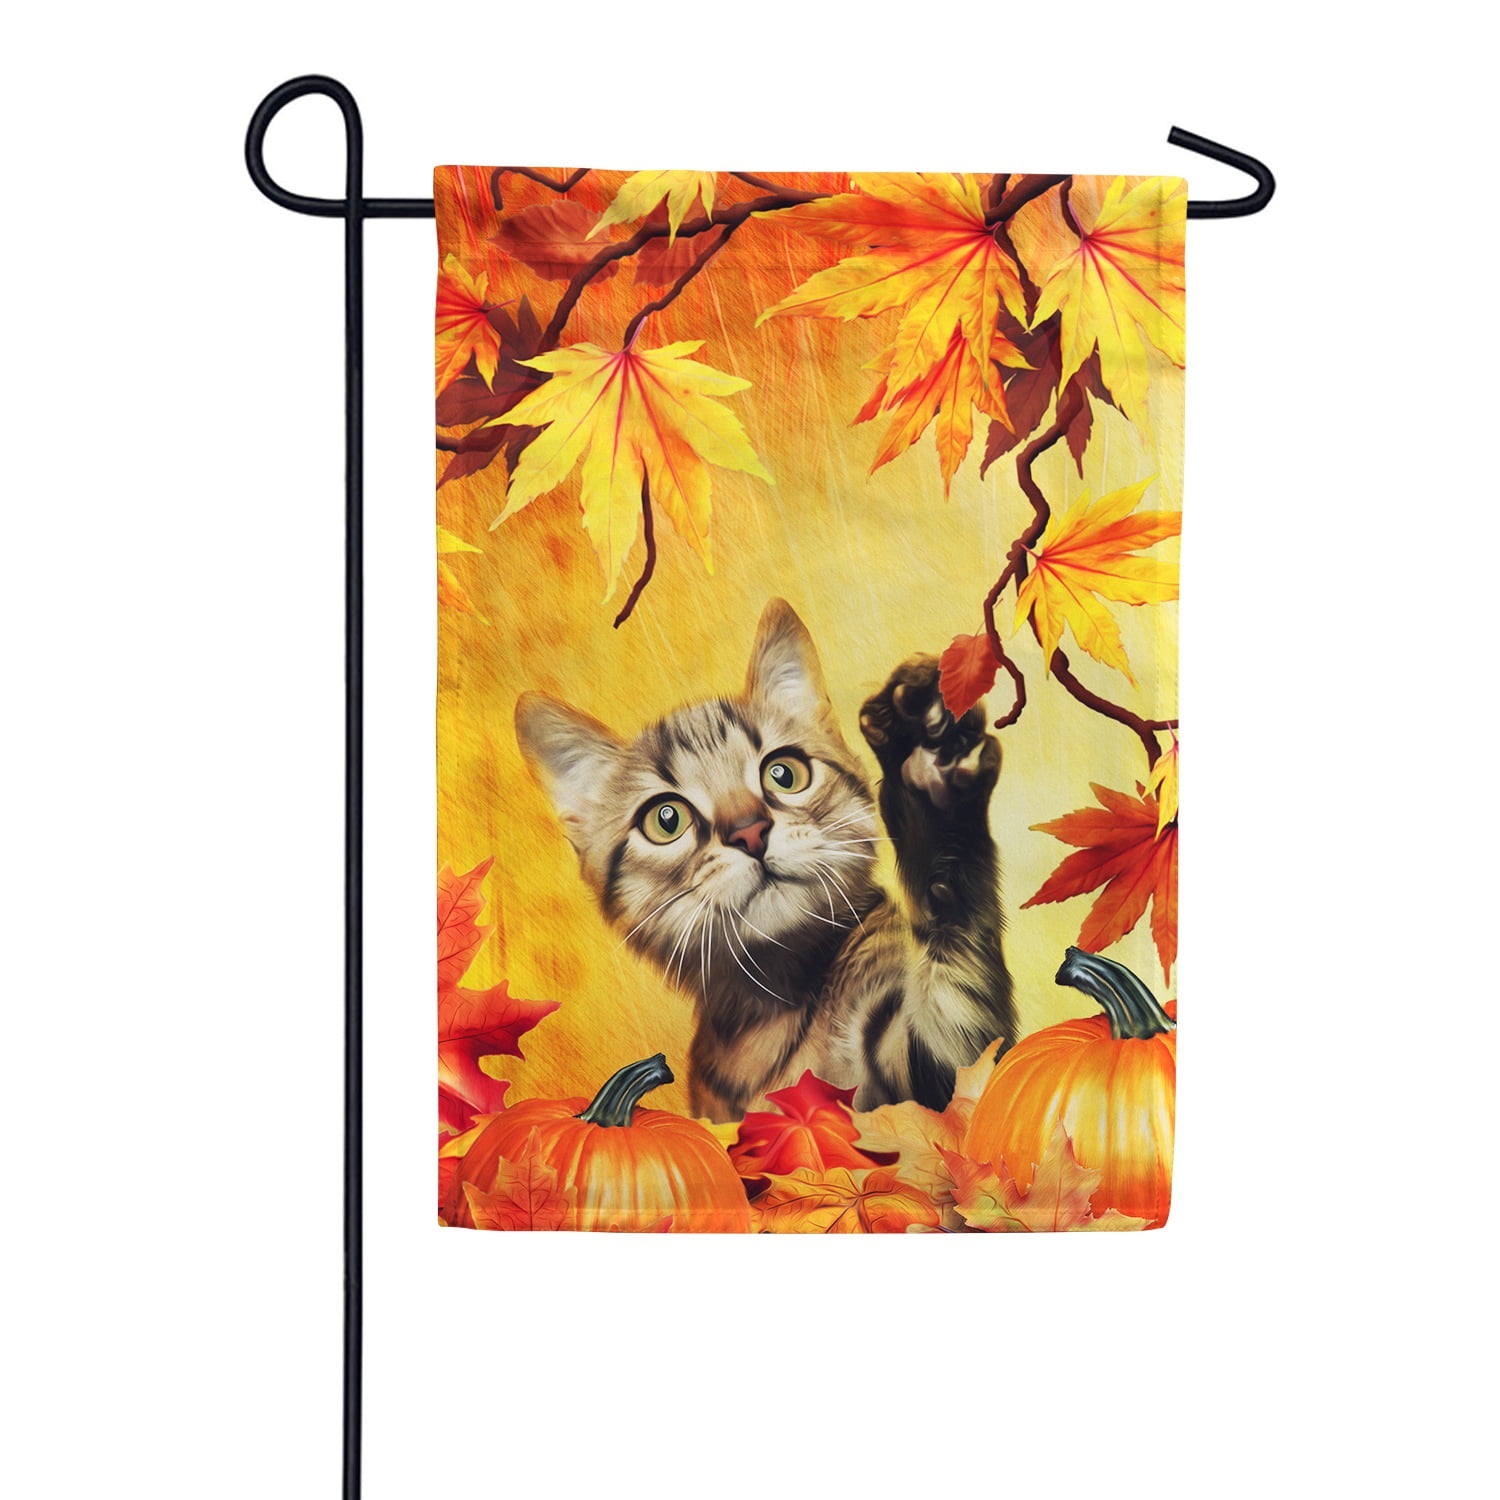 Welcome Tiger Waterfall Home Garden Flag House Flags Yard Banner Double Side 